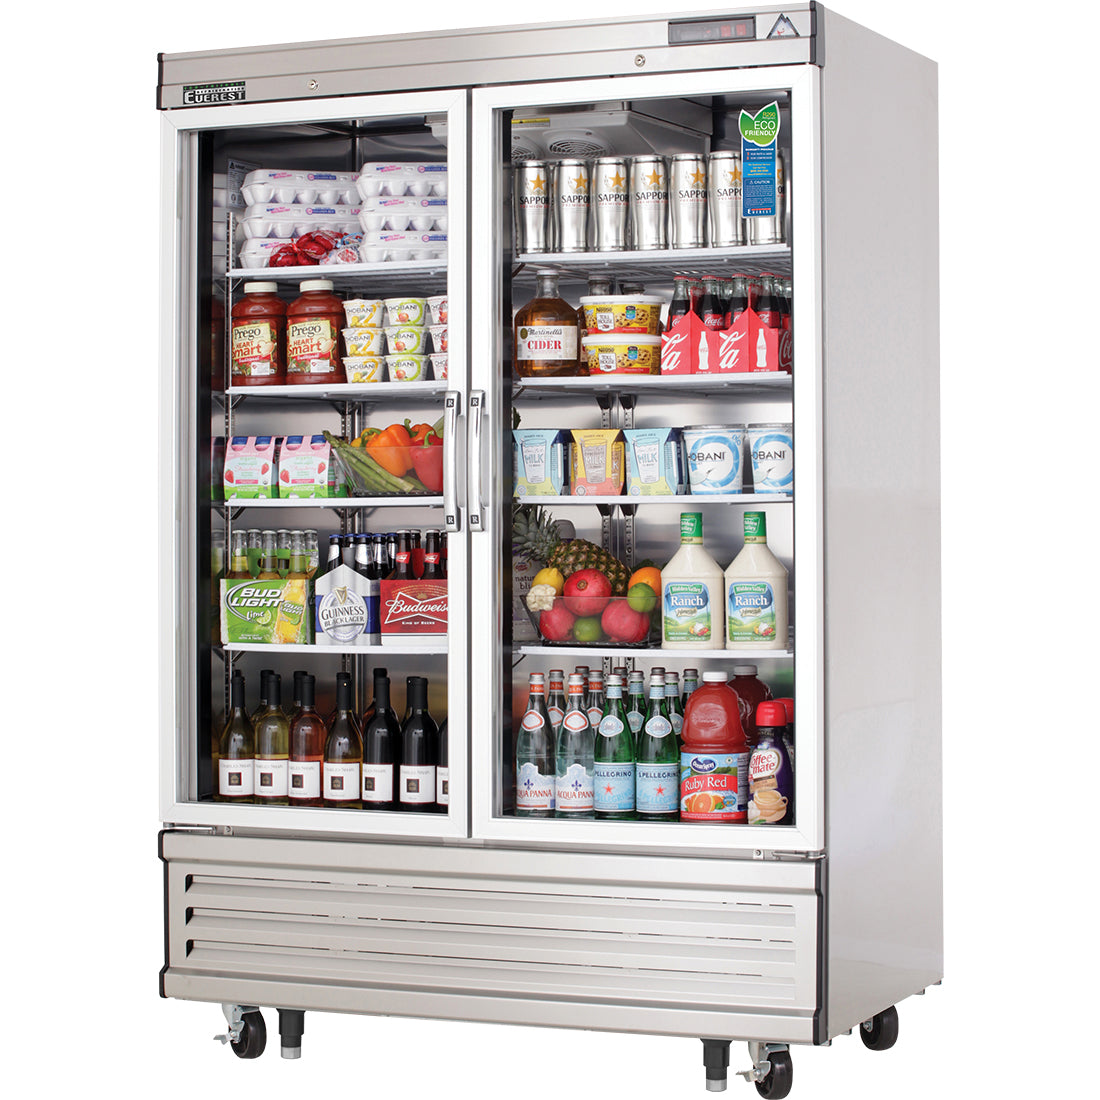 Everest EB Series-EBGR2 Two Section Glass Door Upright Reach-In Refrigerator - 50 Cu. Ft.